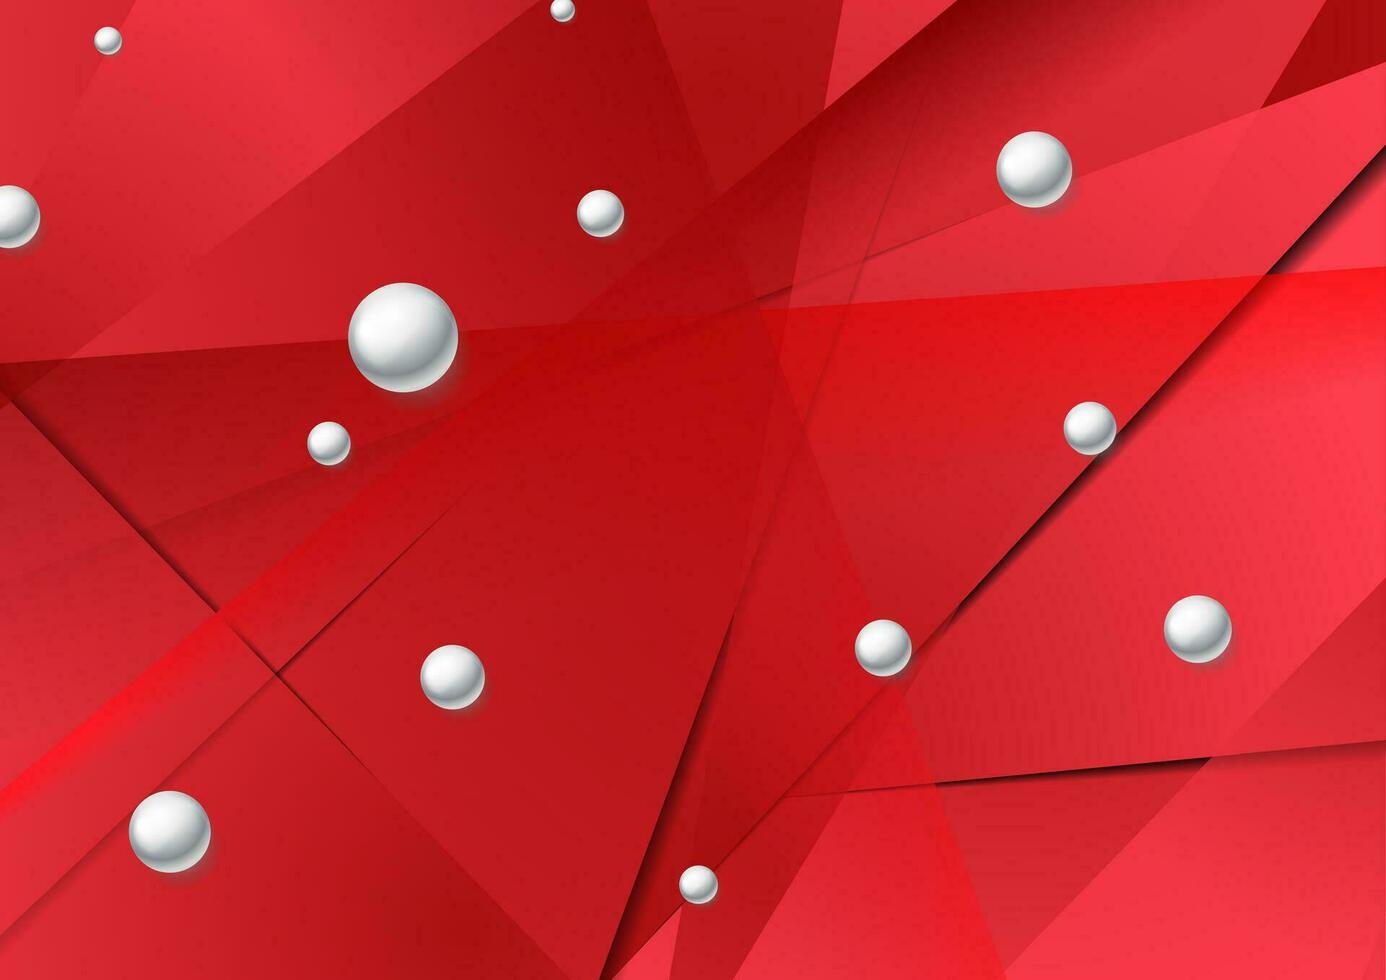 Bright red low poly abstract background with circle beads vector